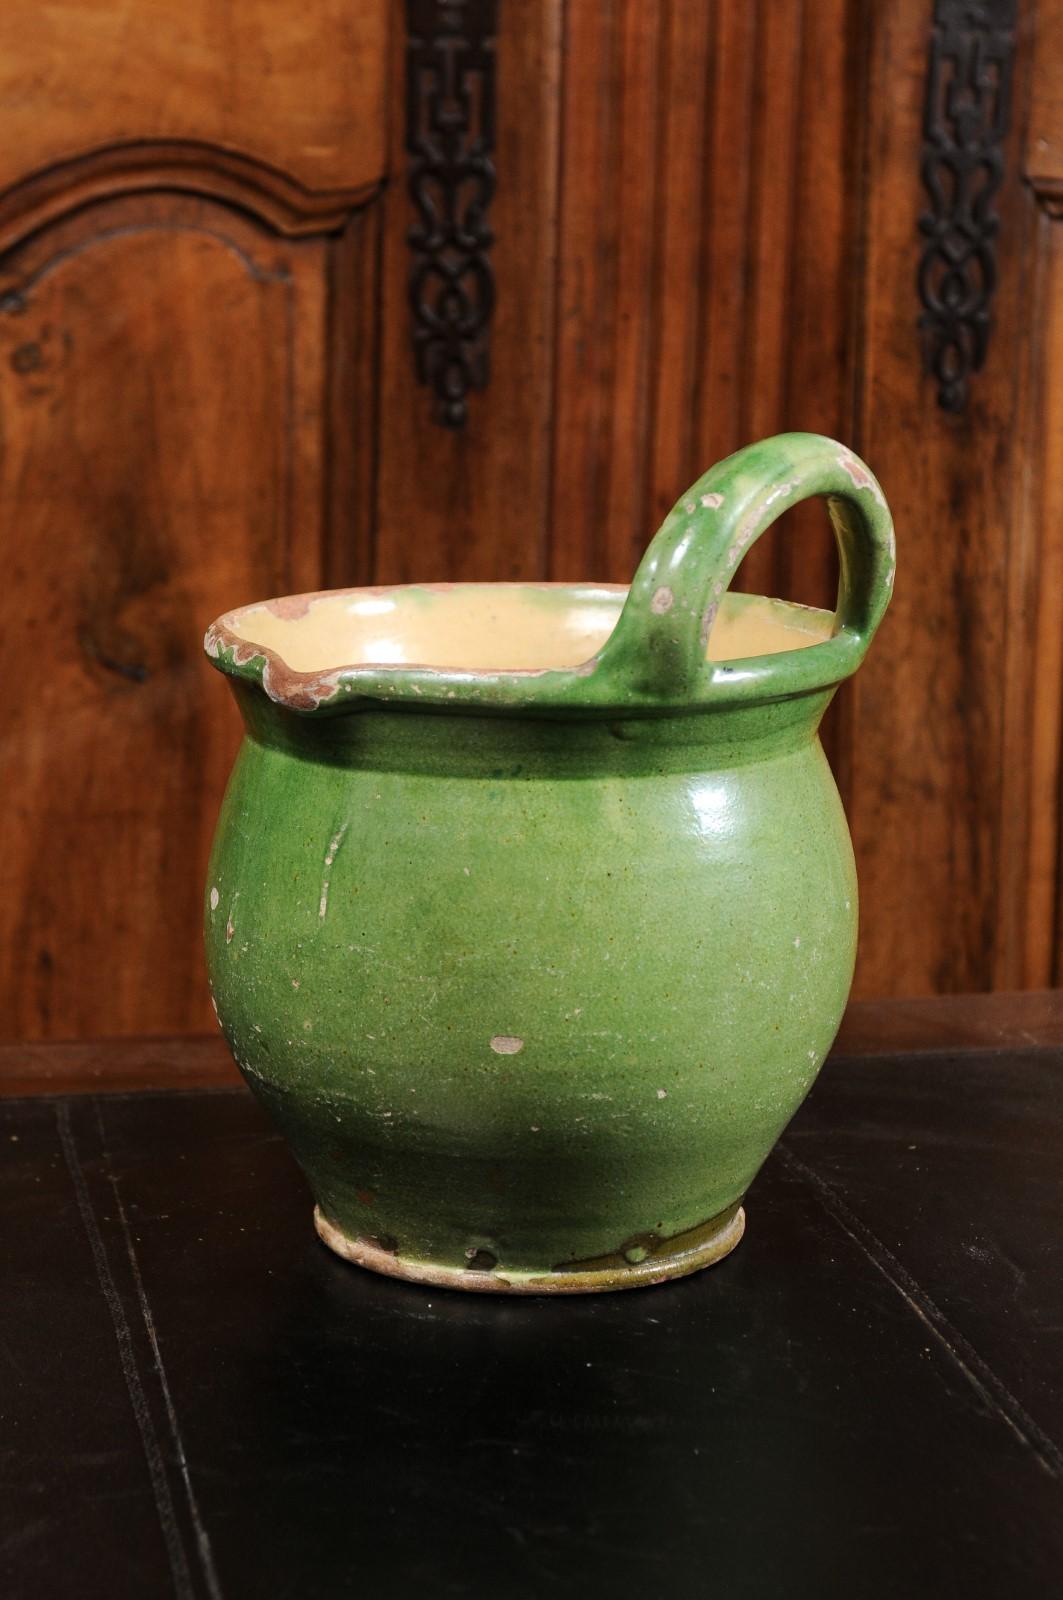 Pottery Rustic French Provincial Green Glazed 19th Century Jardinière with Back Handle